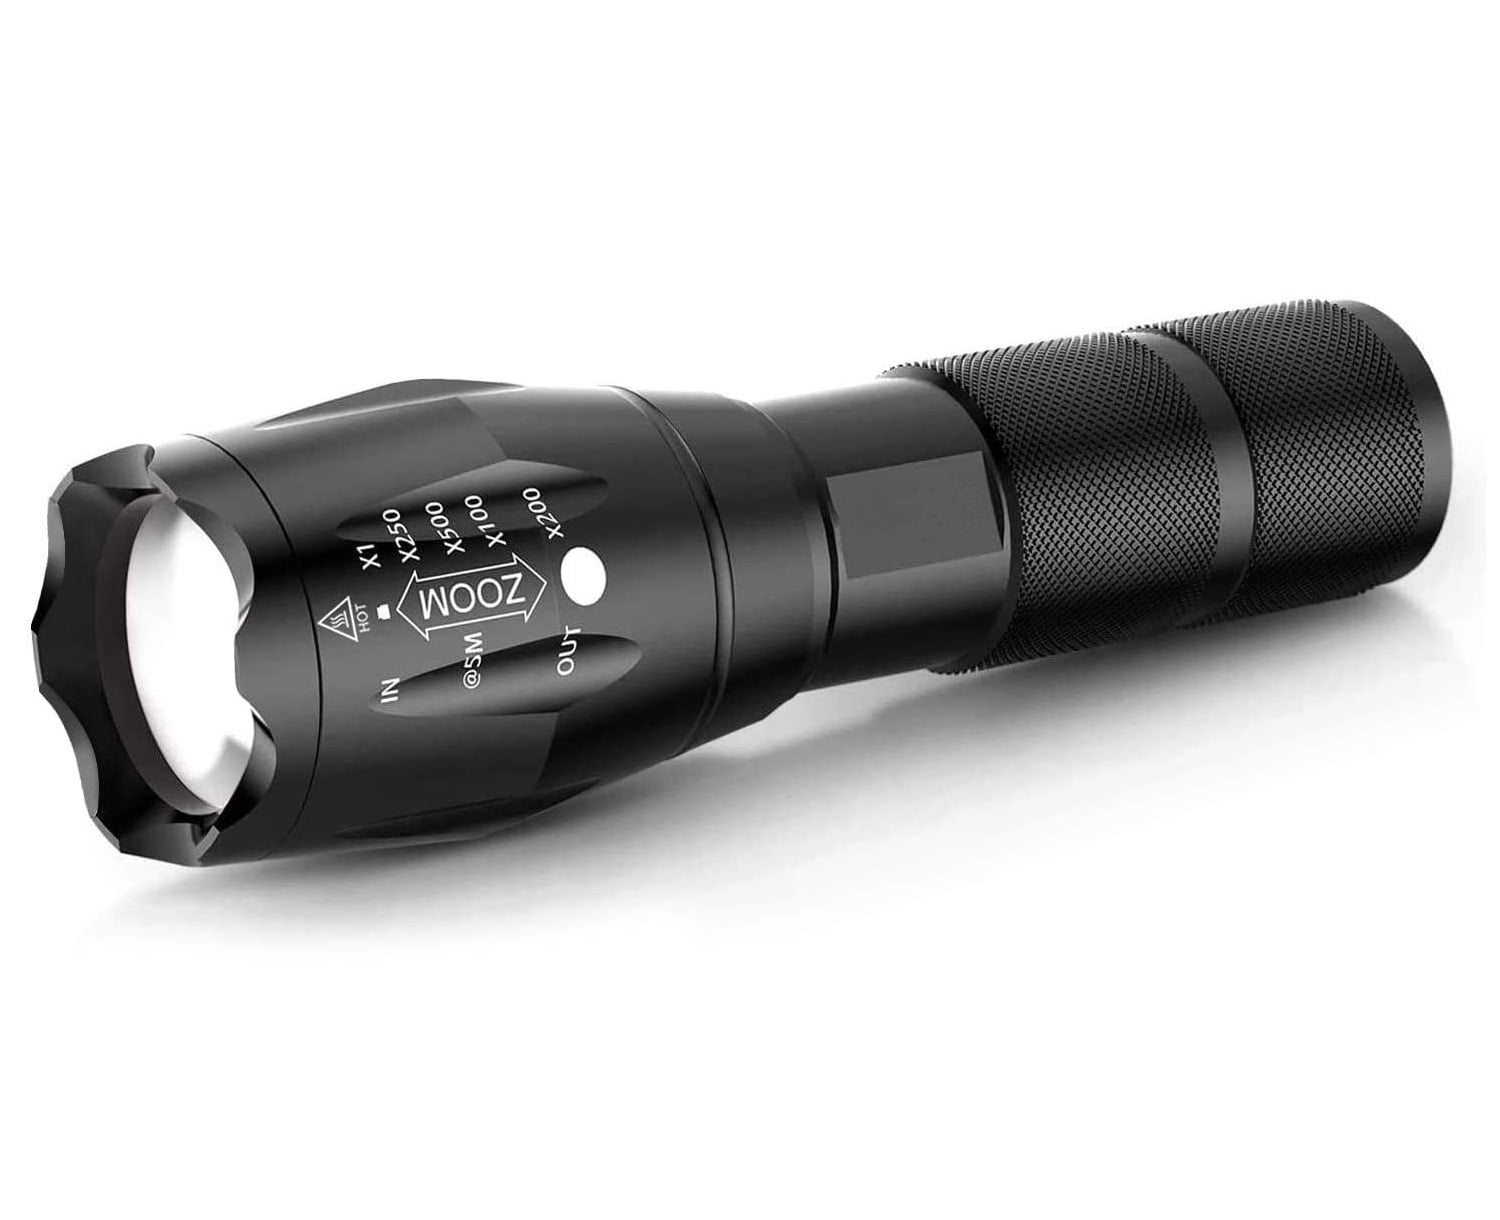 2x Strong Light military grade Tactical Flashlight with 5 modes & zoom function 